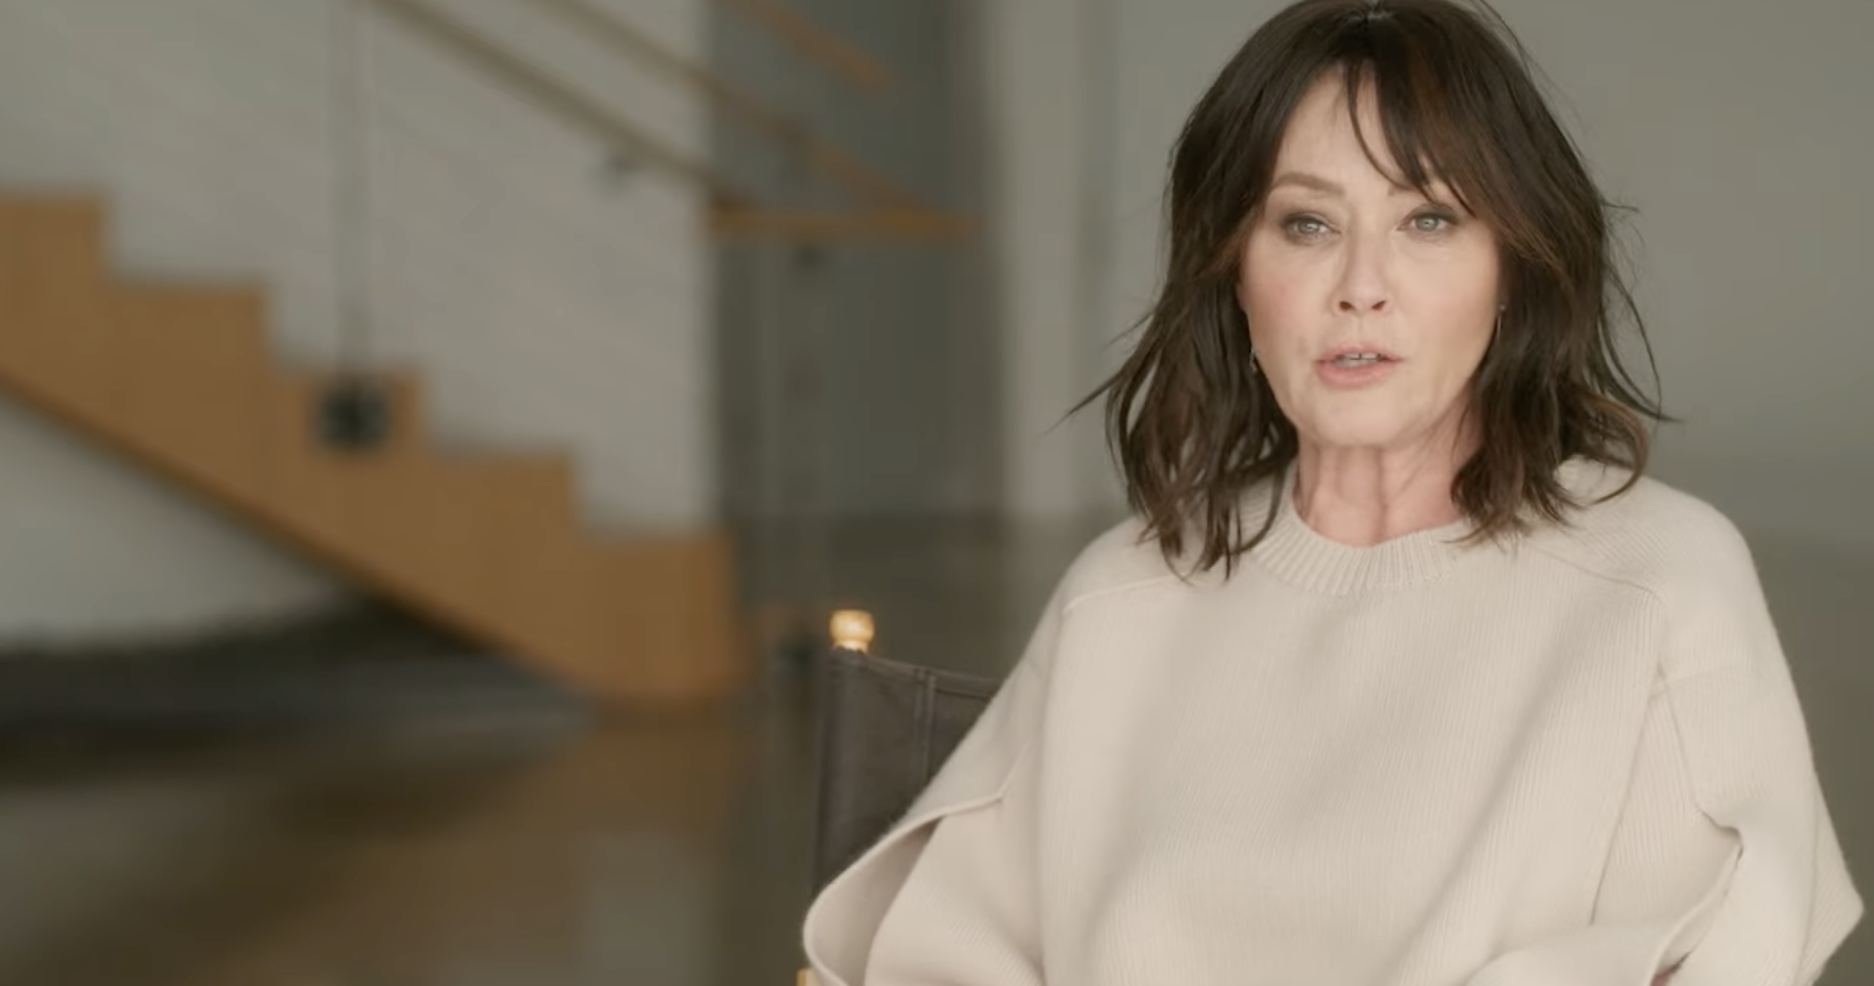 Shannen Doherty Shares Her Cancer Has Spread to Her Bones: ‘I’m Not Done with Living’